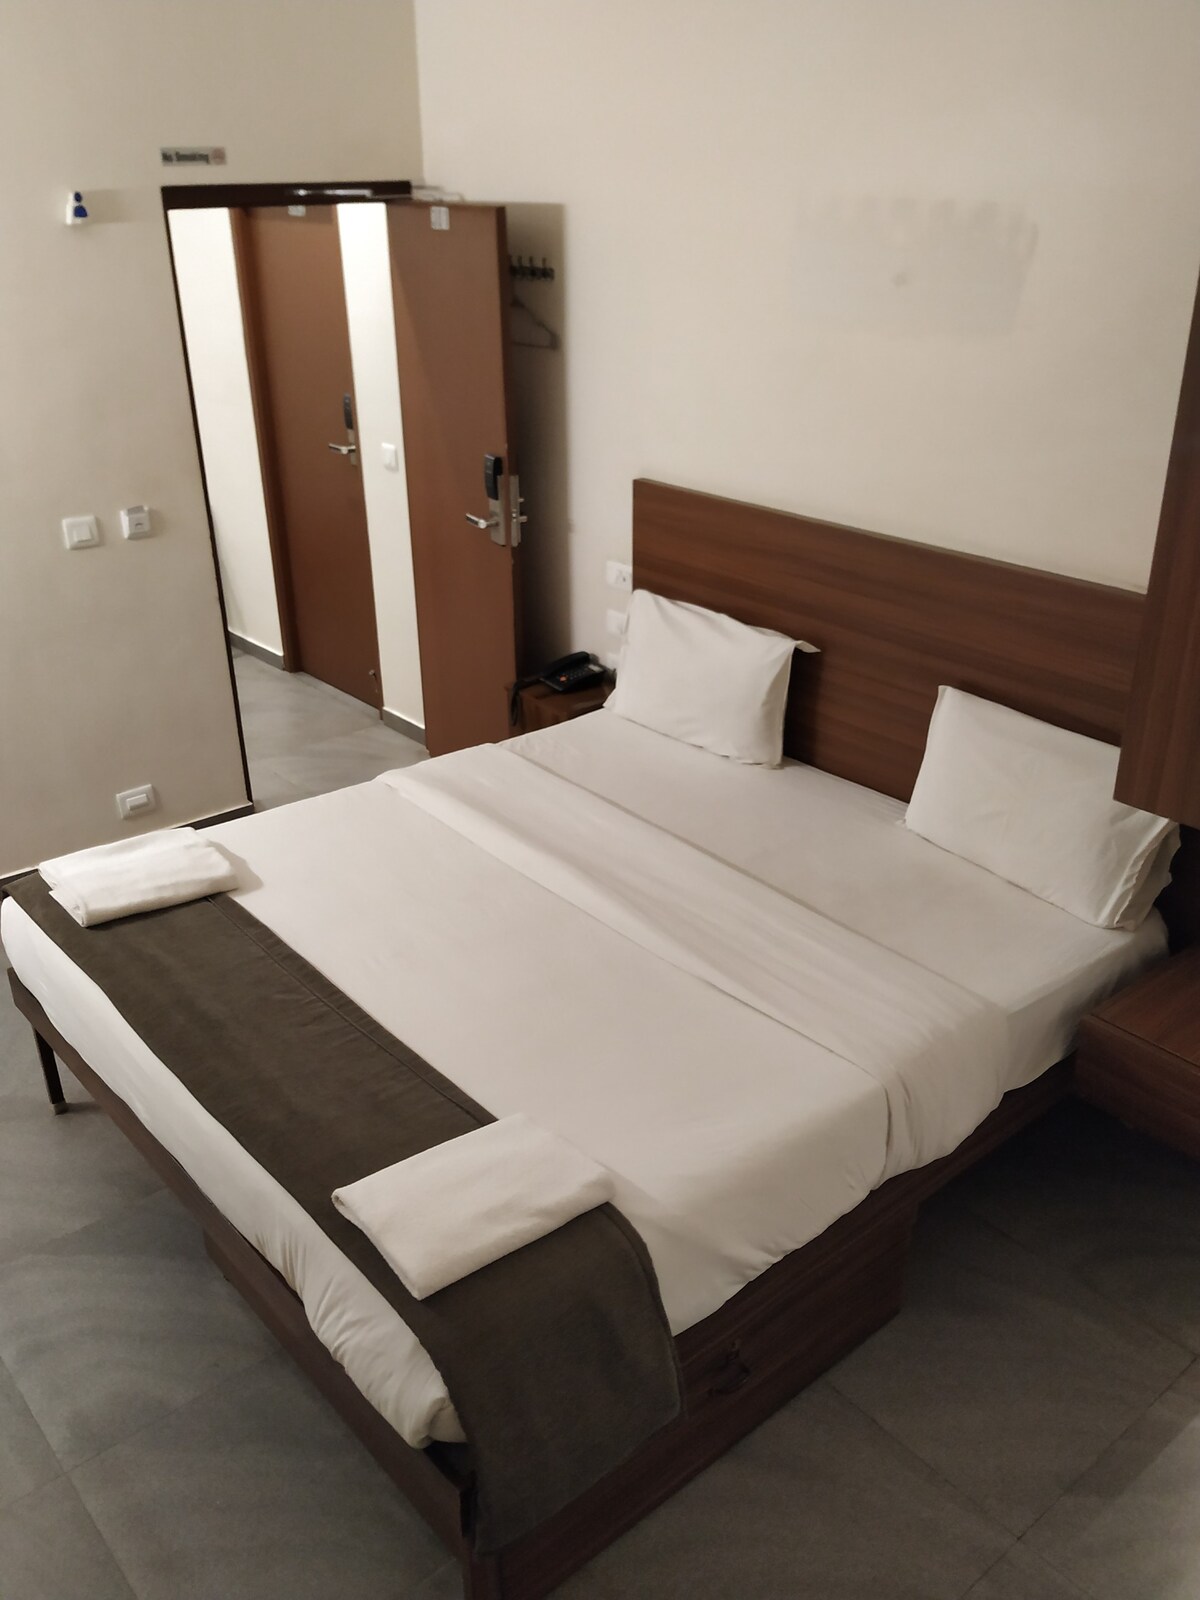 avea- Deluxe Room with Private Patio